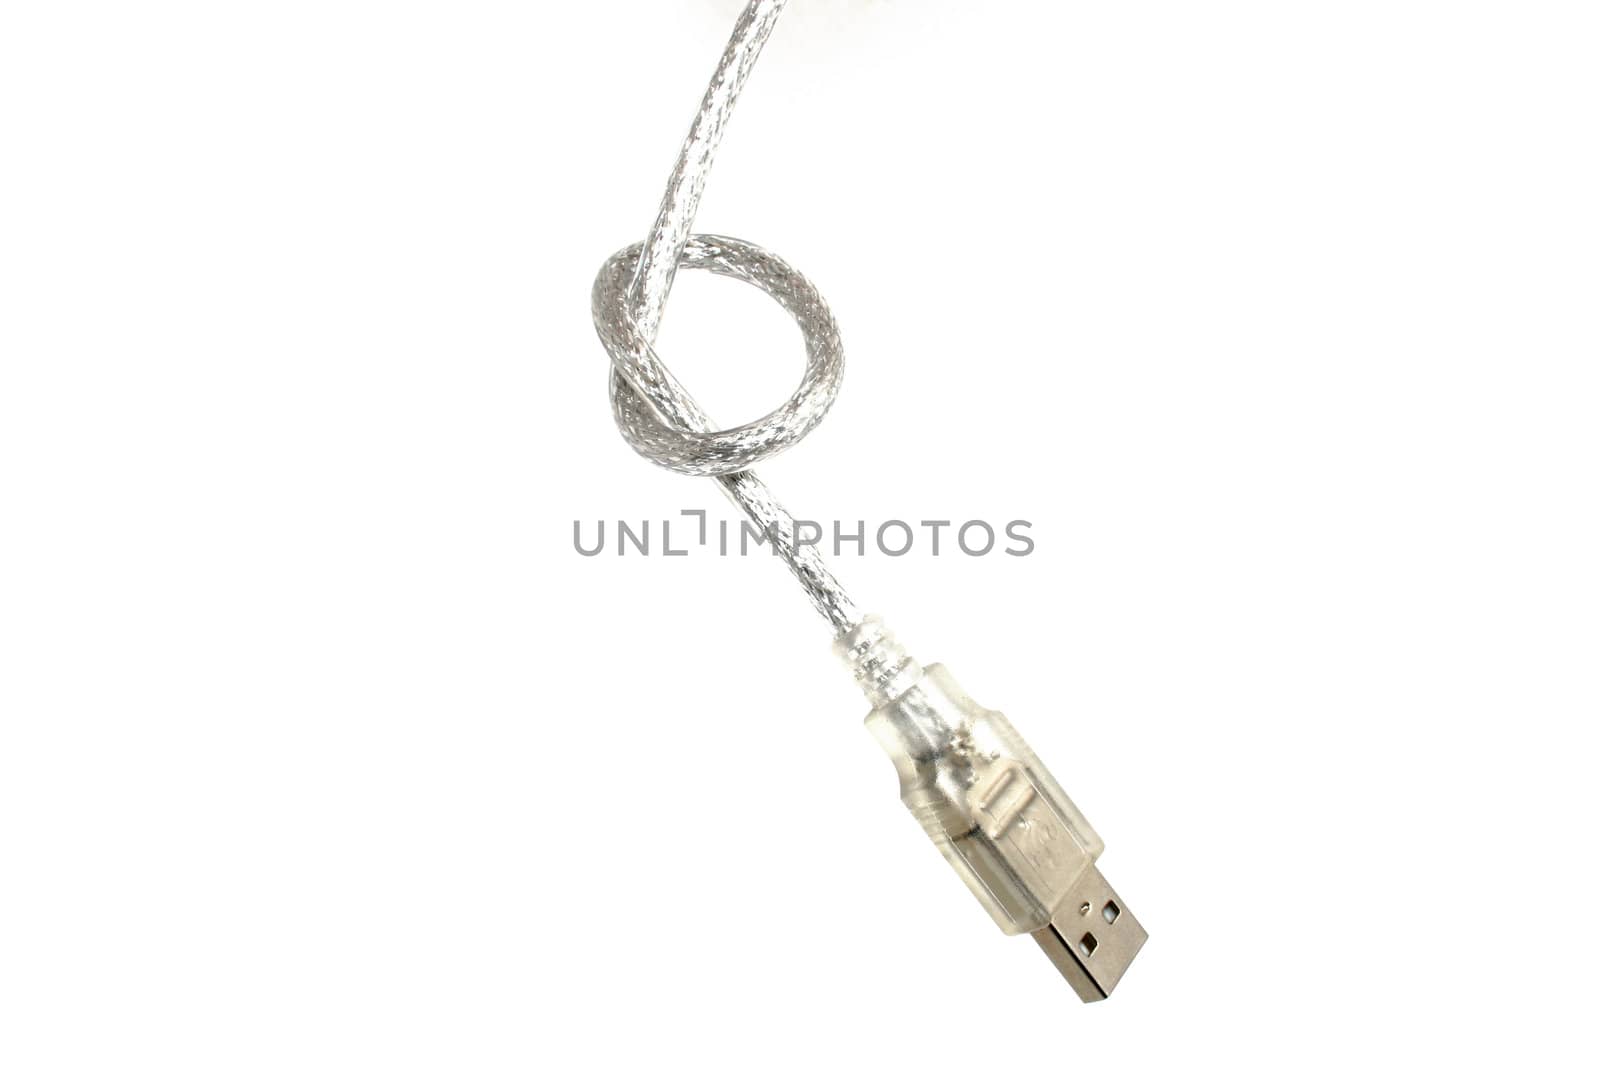 usb-cable with knot by Brightdawn